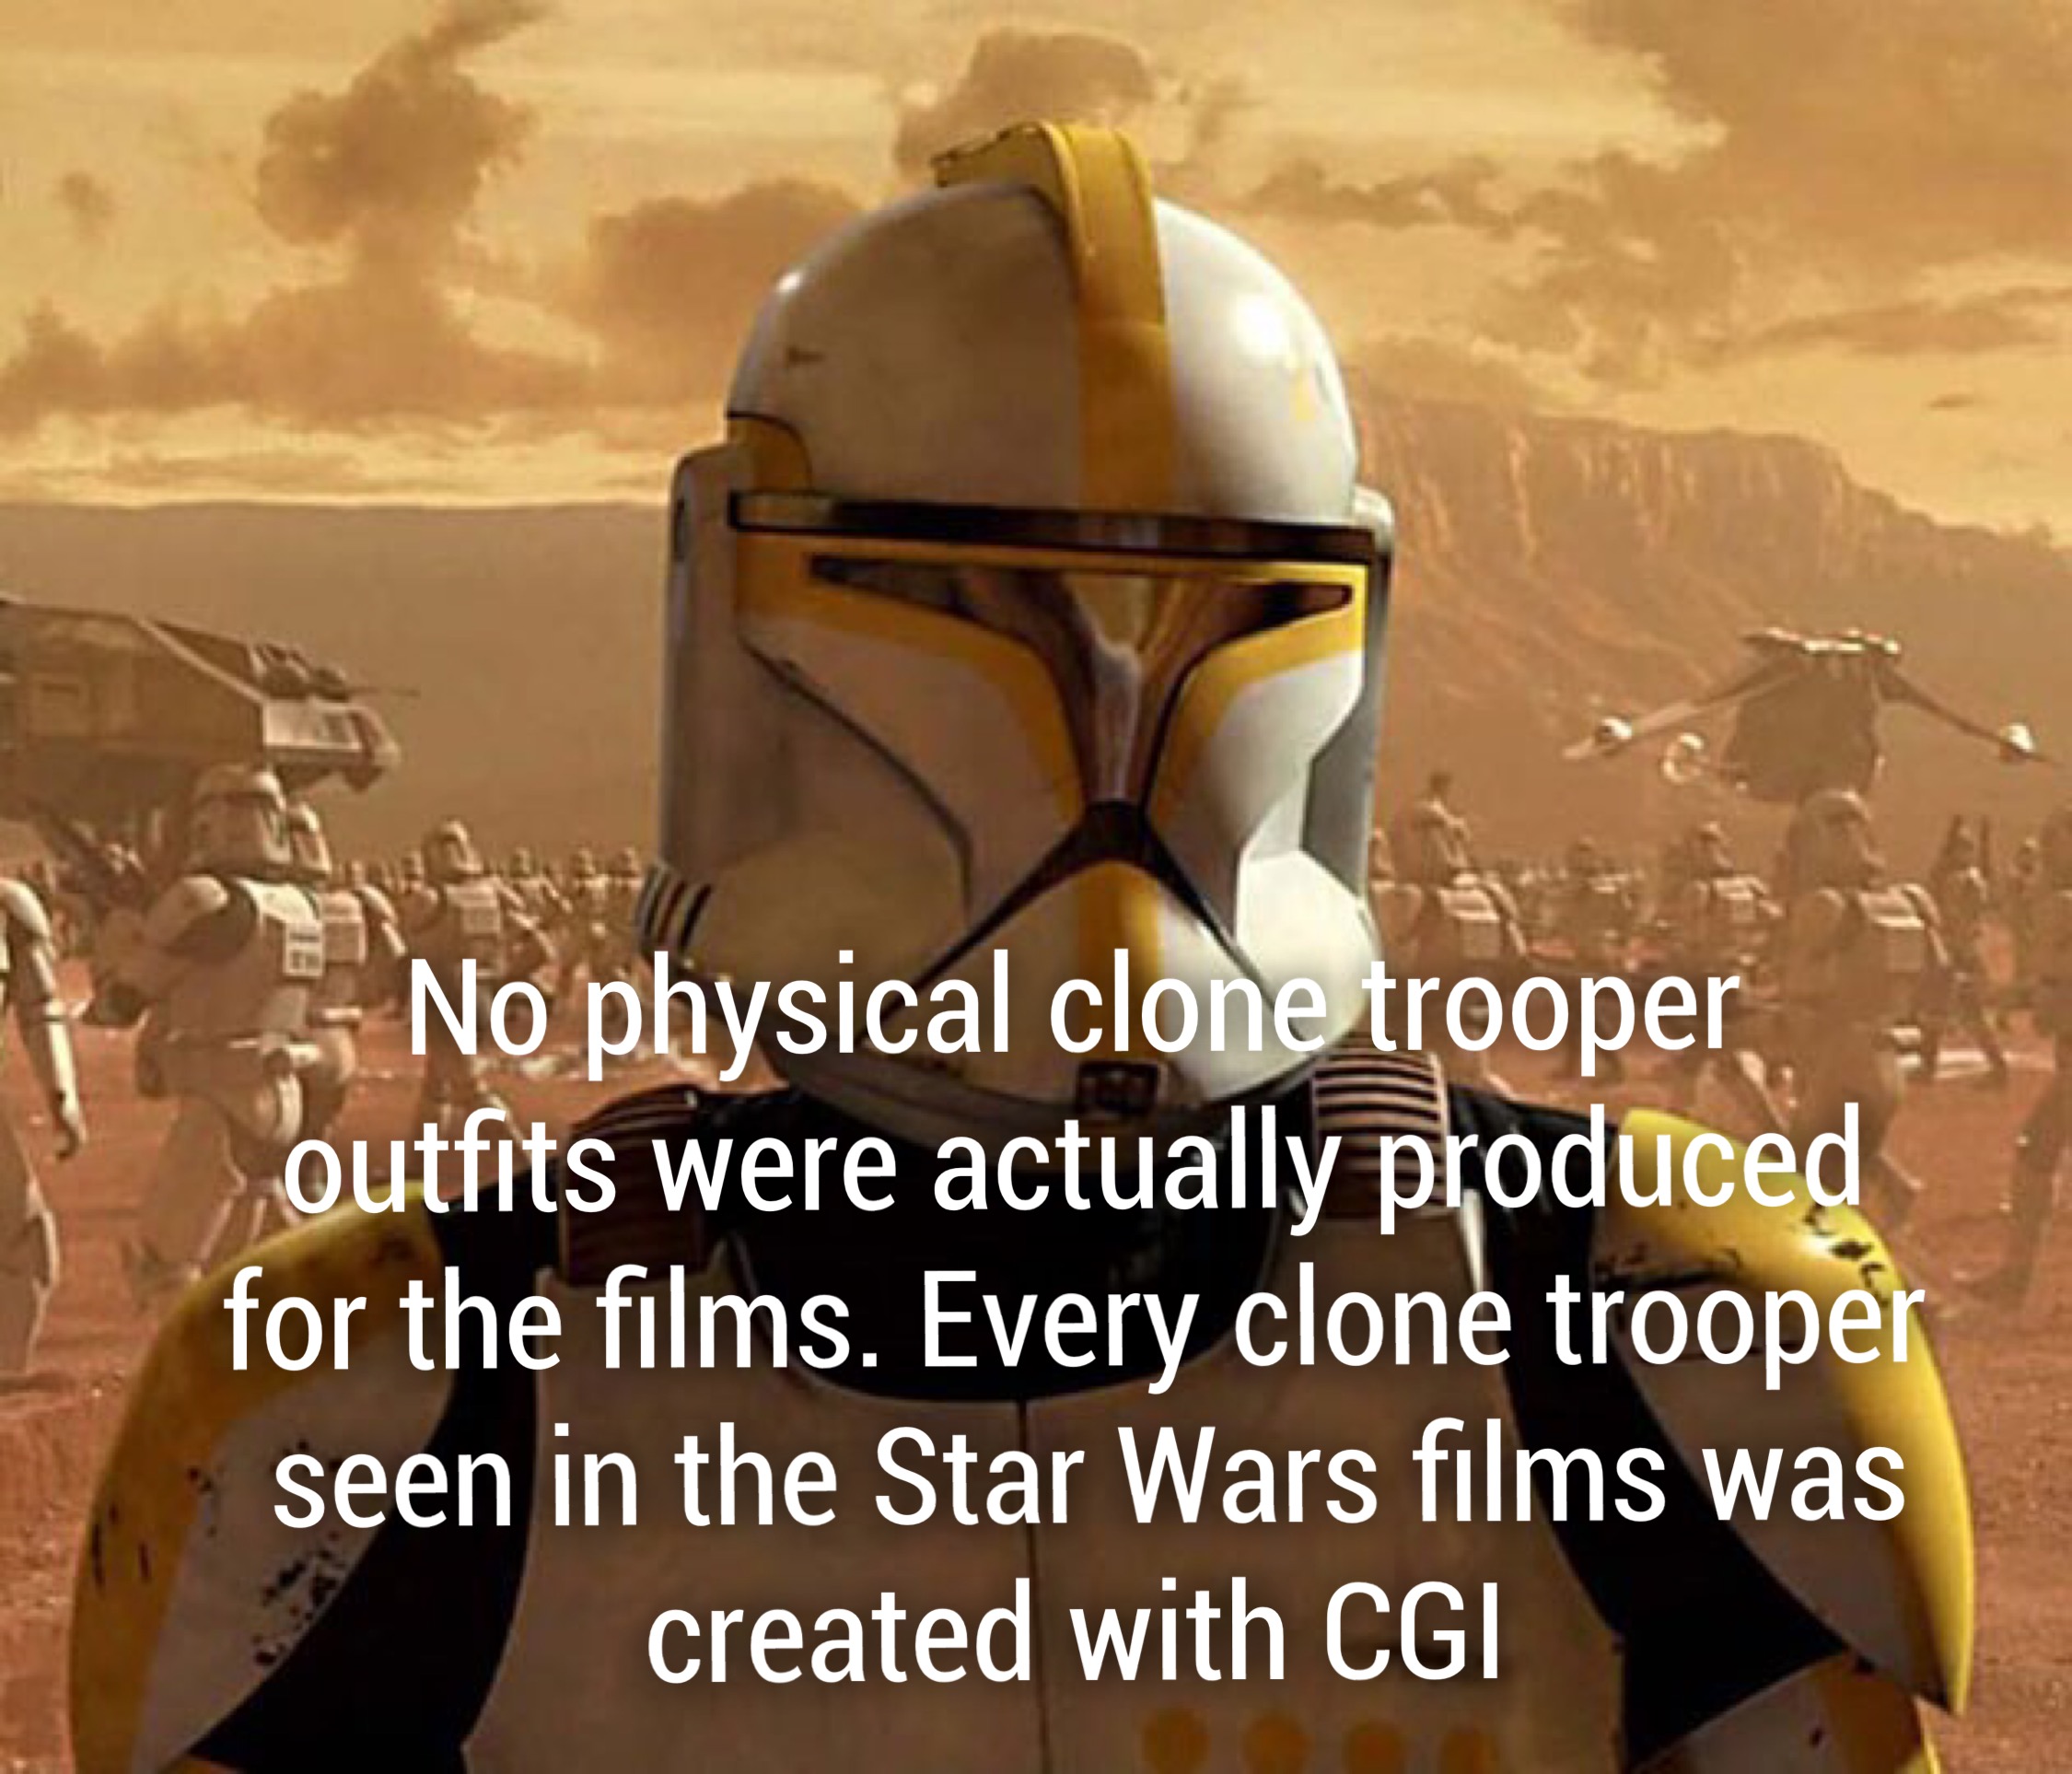 clone trooper armor - No physical clone trooper outfits were actually produced for the films. Every clone trooper seen in the Star Wars films was created with Cgi